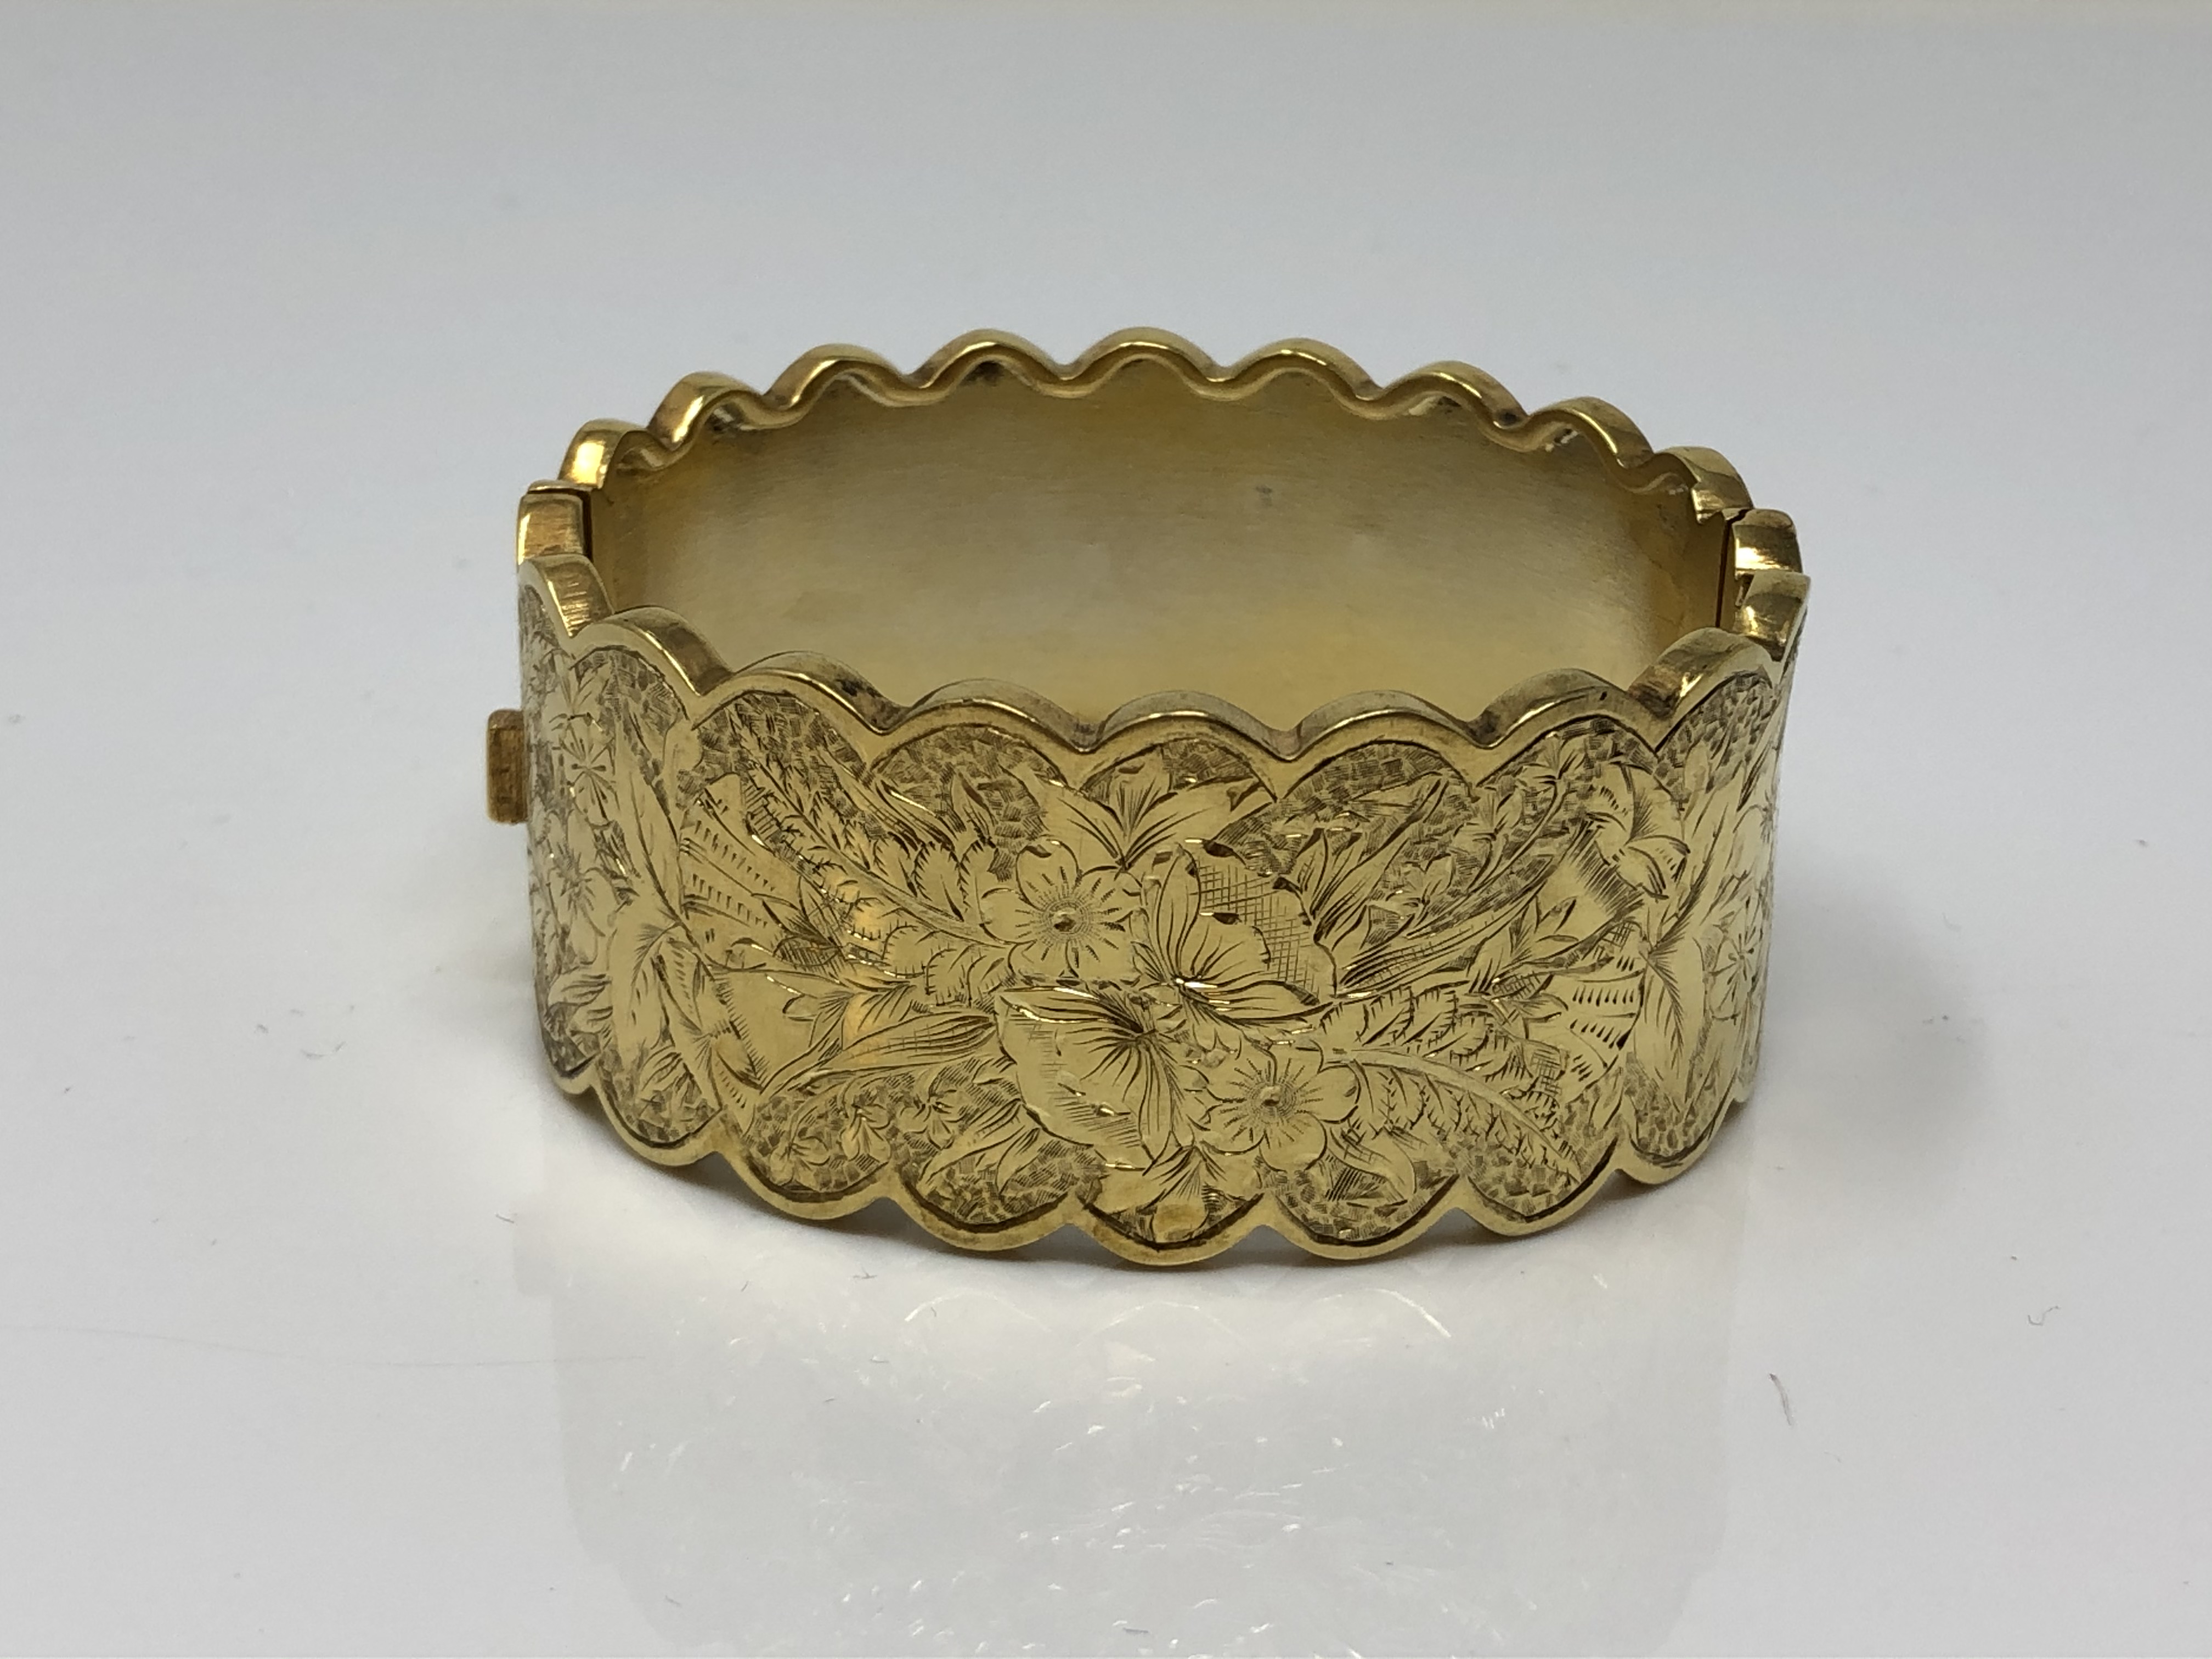 An ornate late Victorian gold plated hinged bangle with engraved decoration